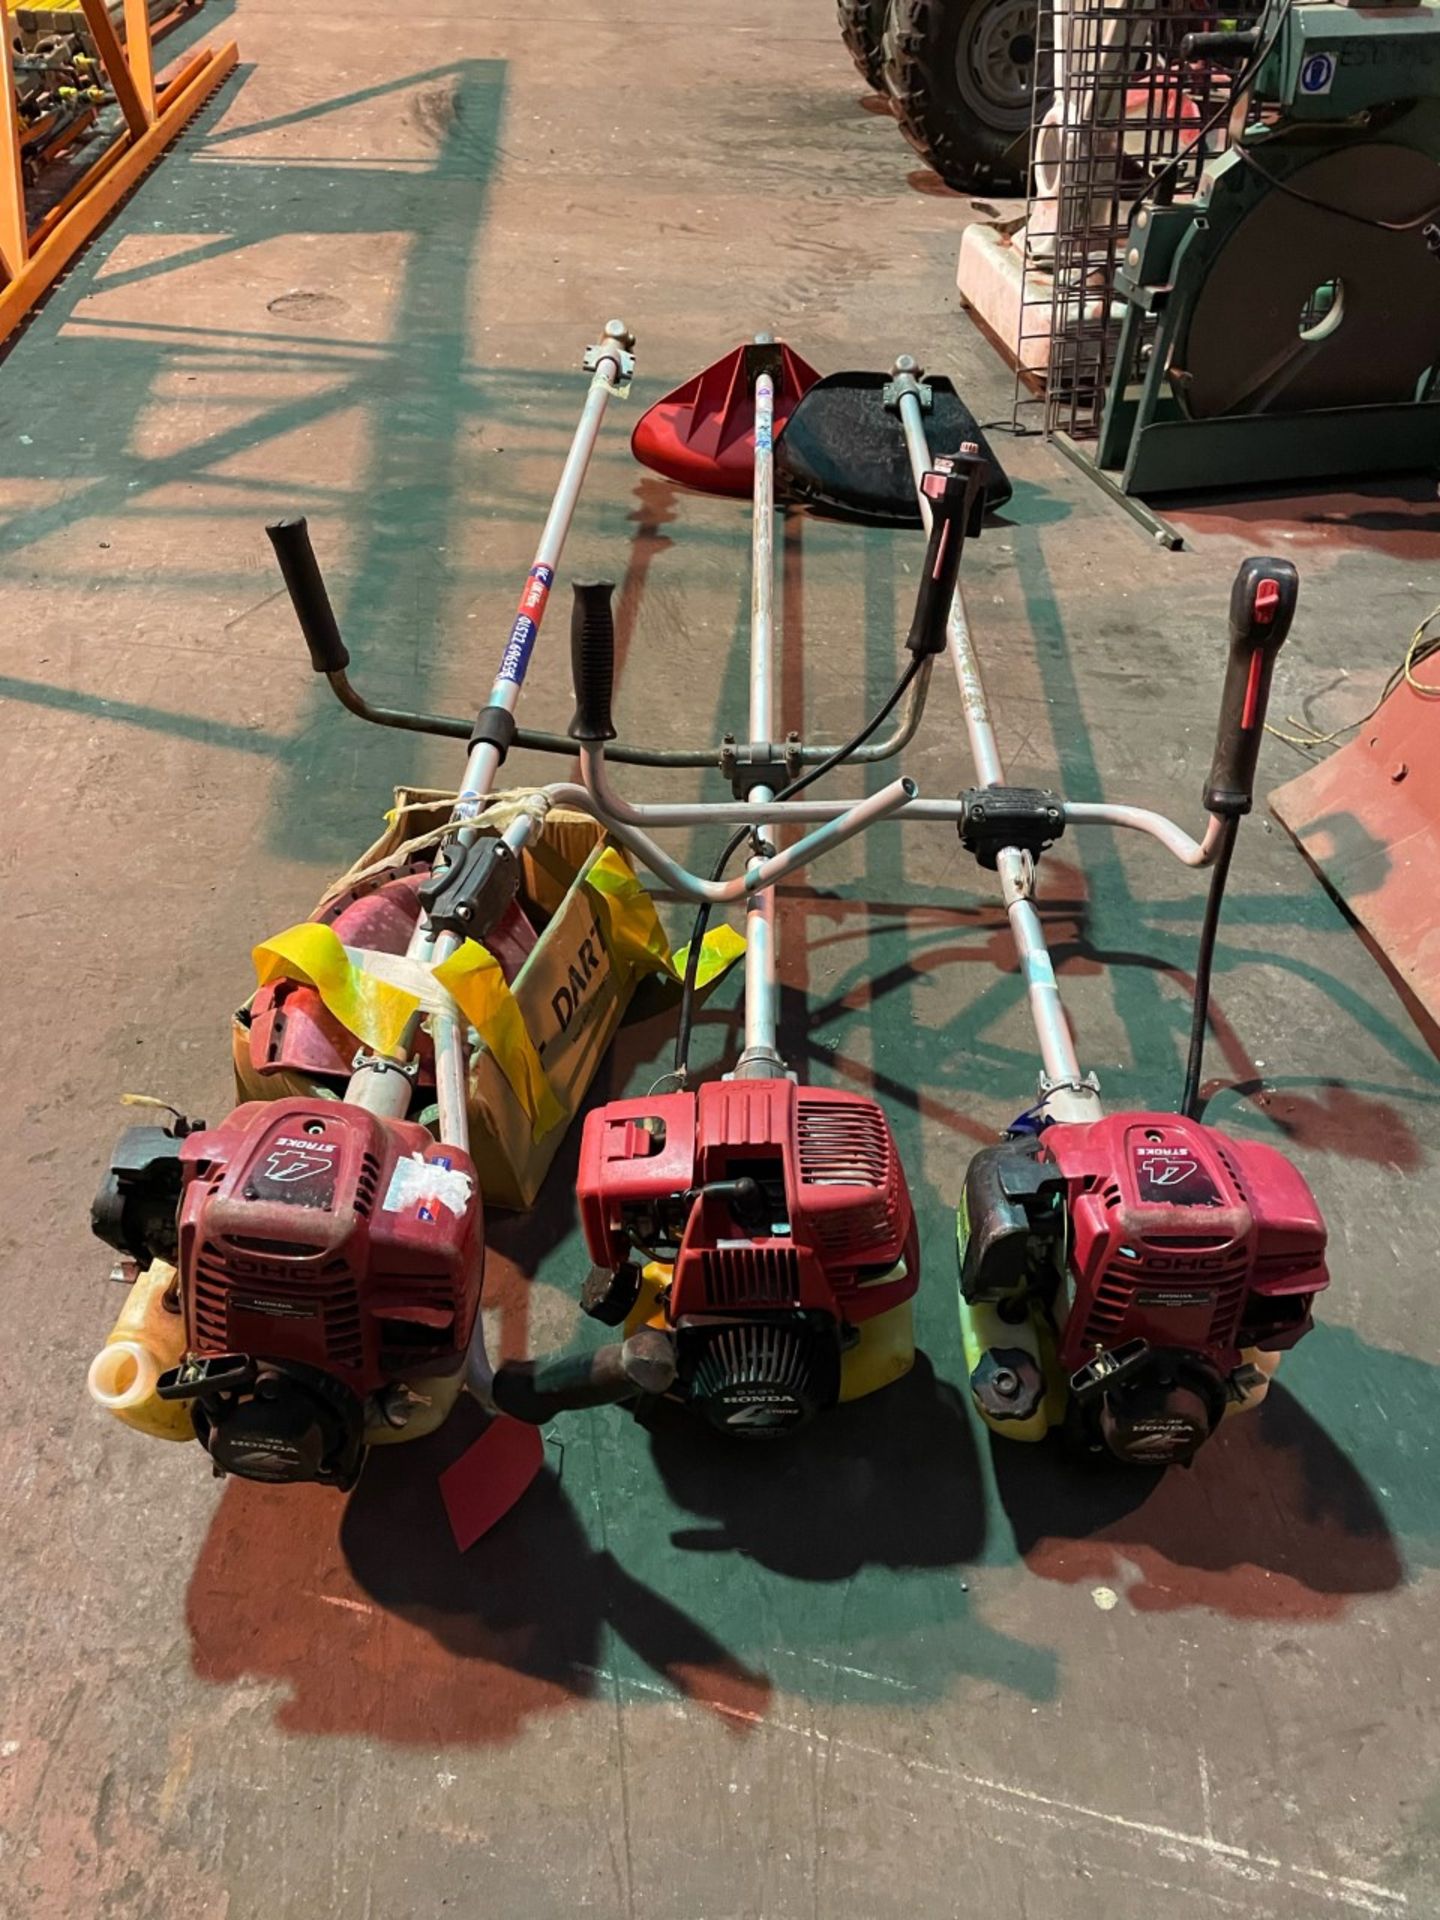 Job lot of 3x Honda 4 stoke strimmers all spares or repairs